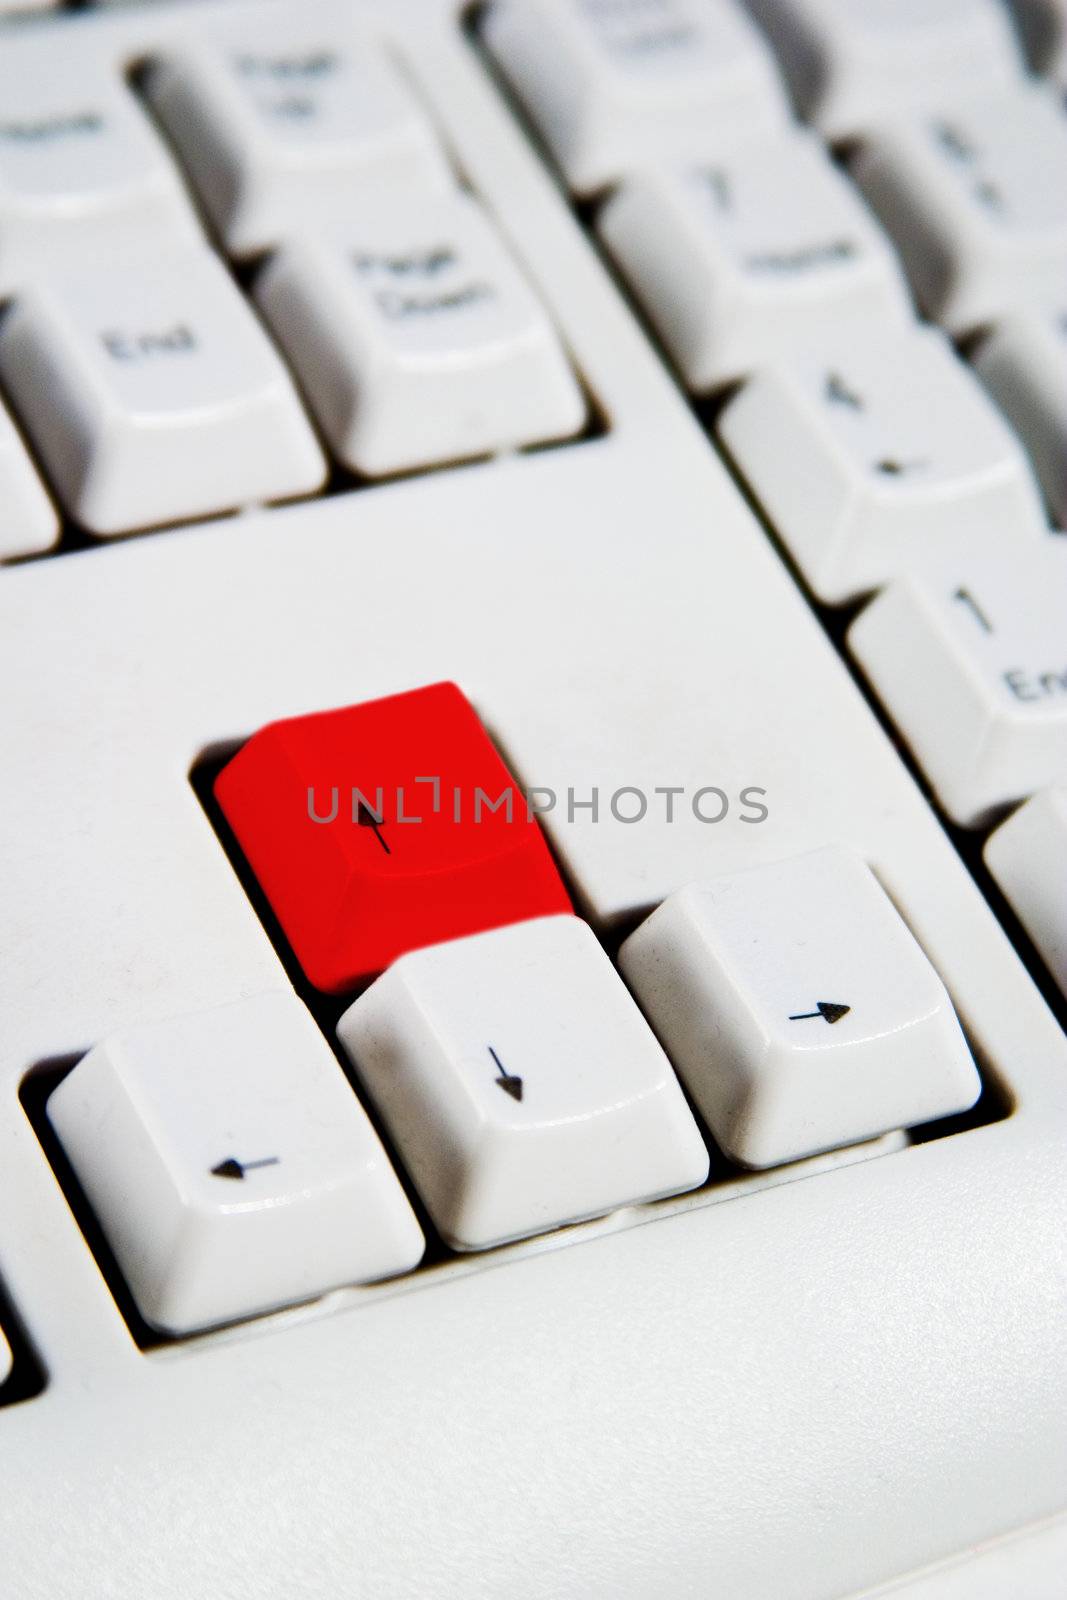 Arrow keys on a desktop computer keyboard with the up arrow red